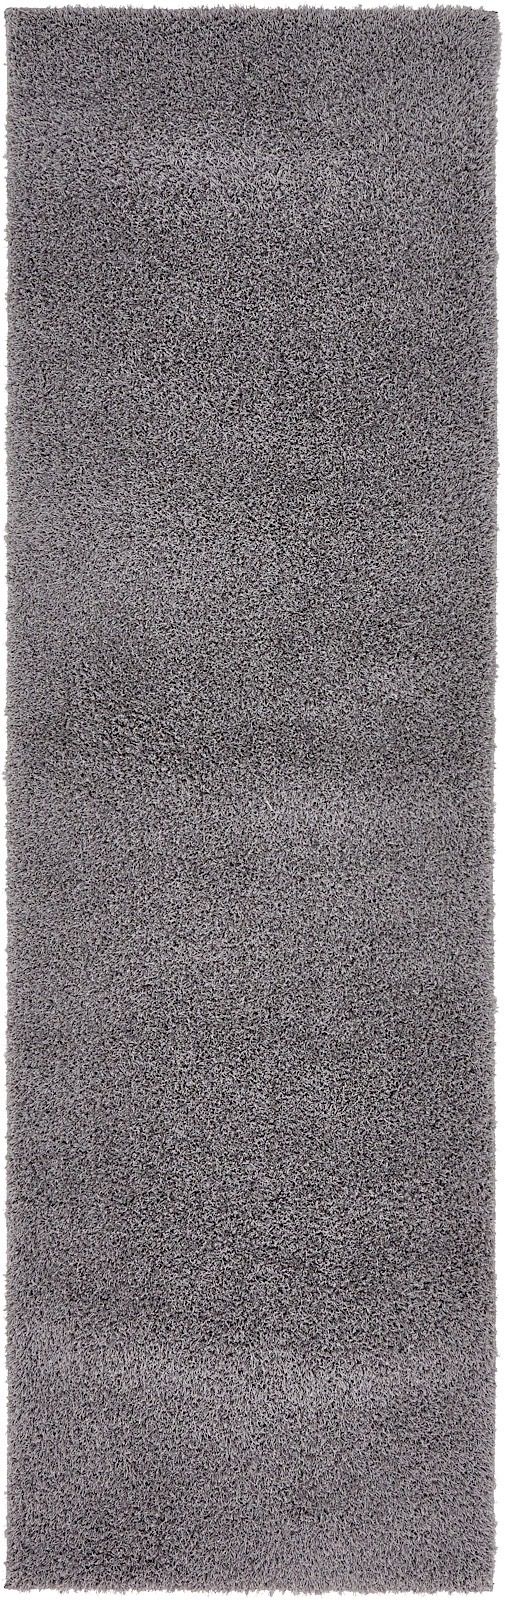 rugpal paramount shag area rug collection